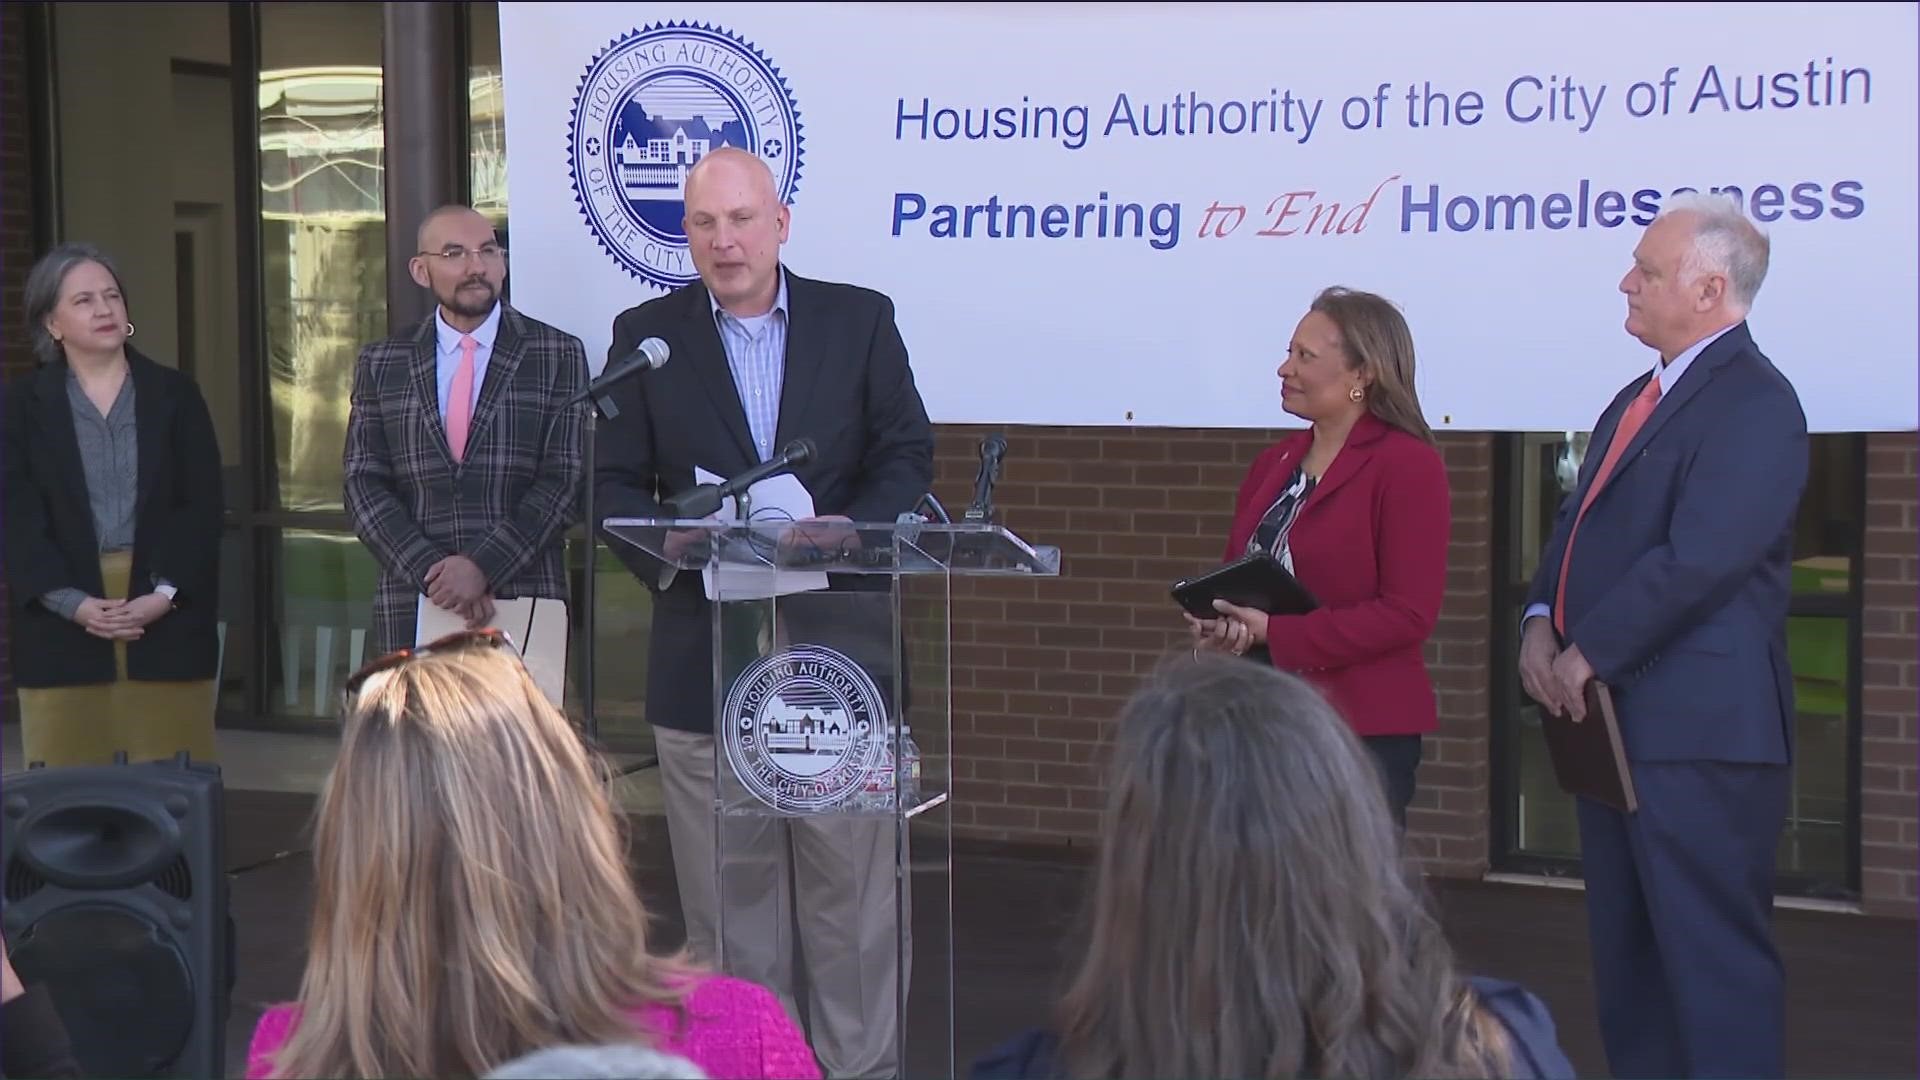 The new program is funded by the U.S. Department of Housing and Urban Development, and will provide support for the next 20 years.